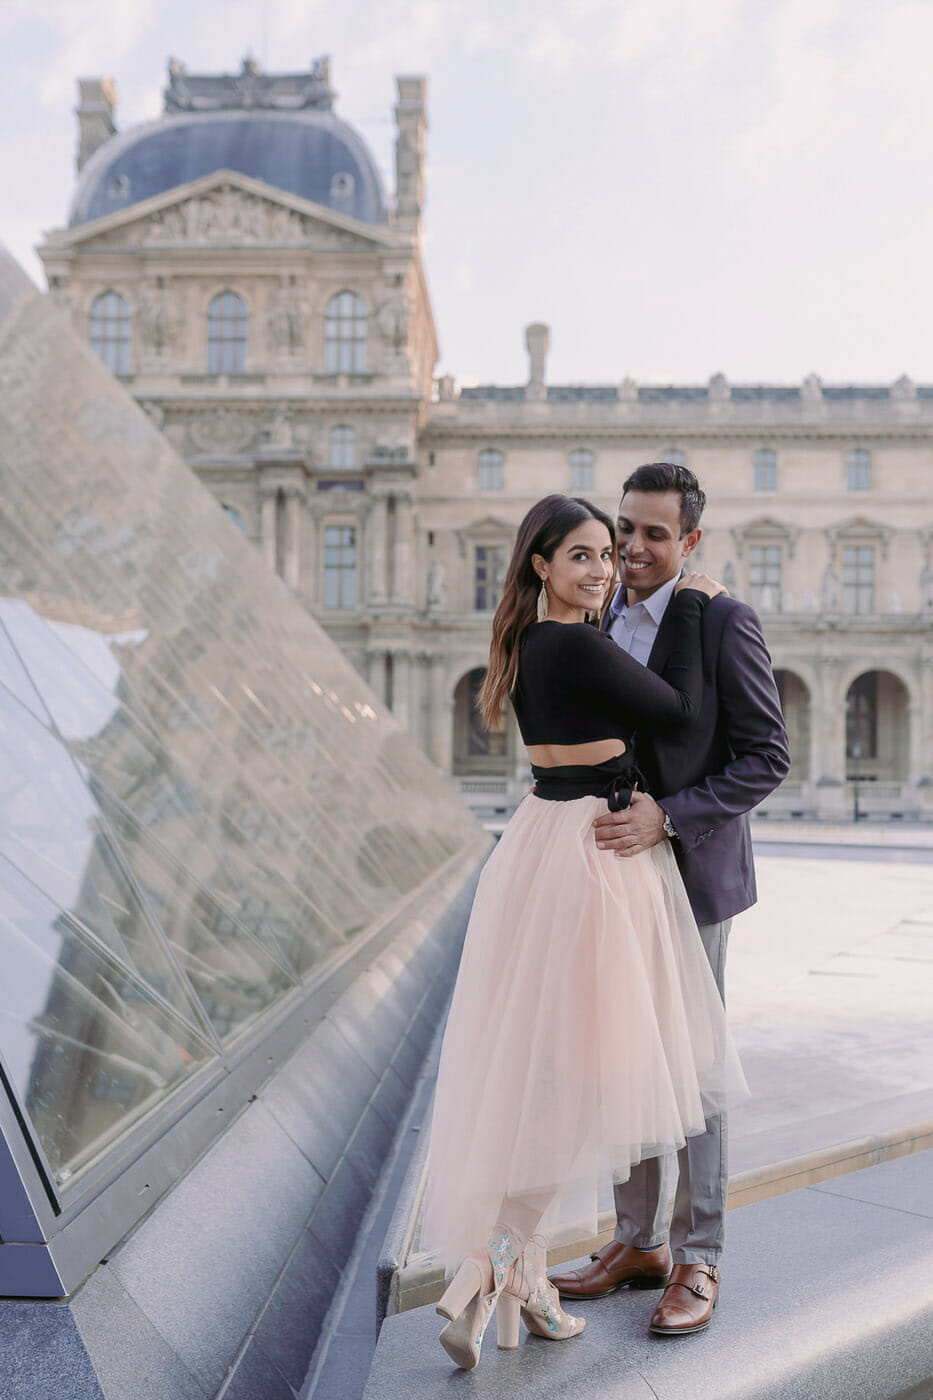 Cute couple photos at the Louvre Museum